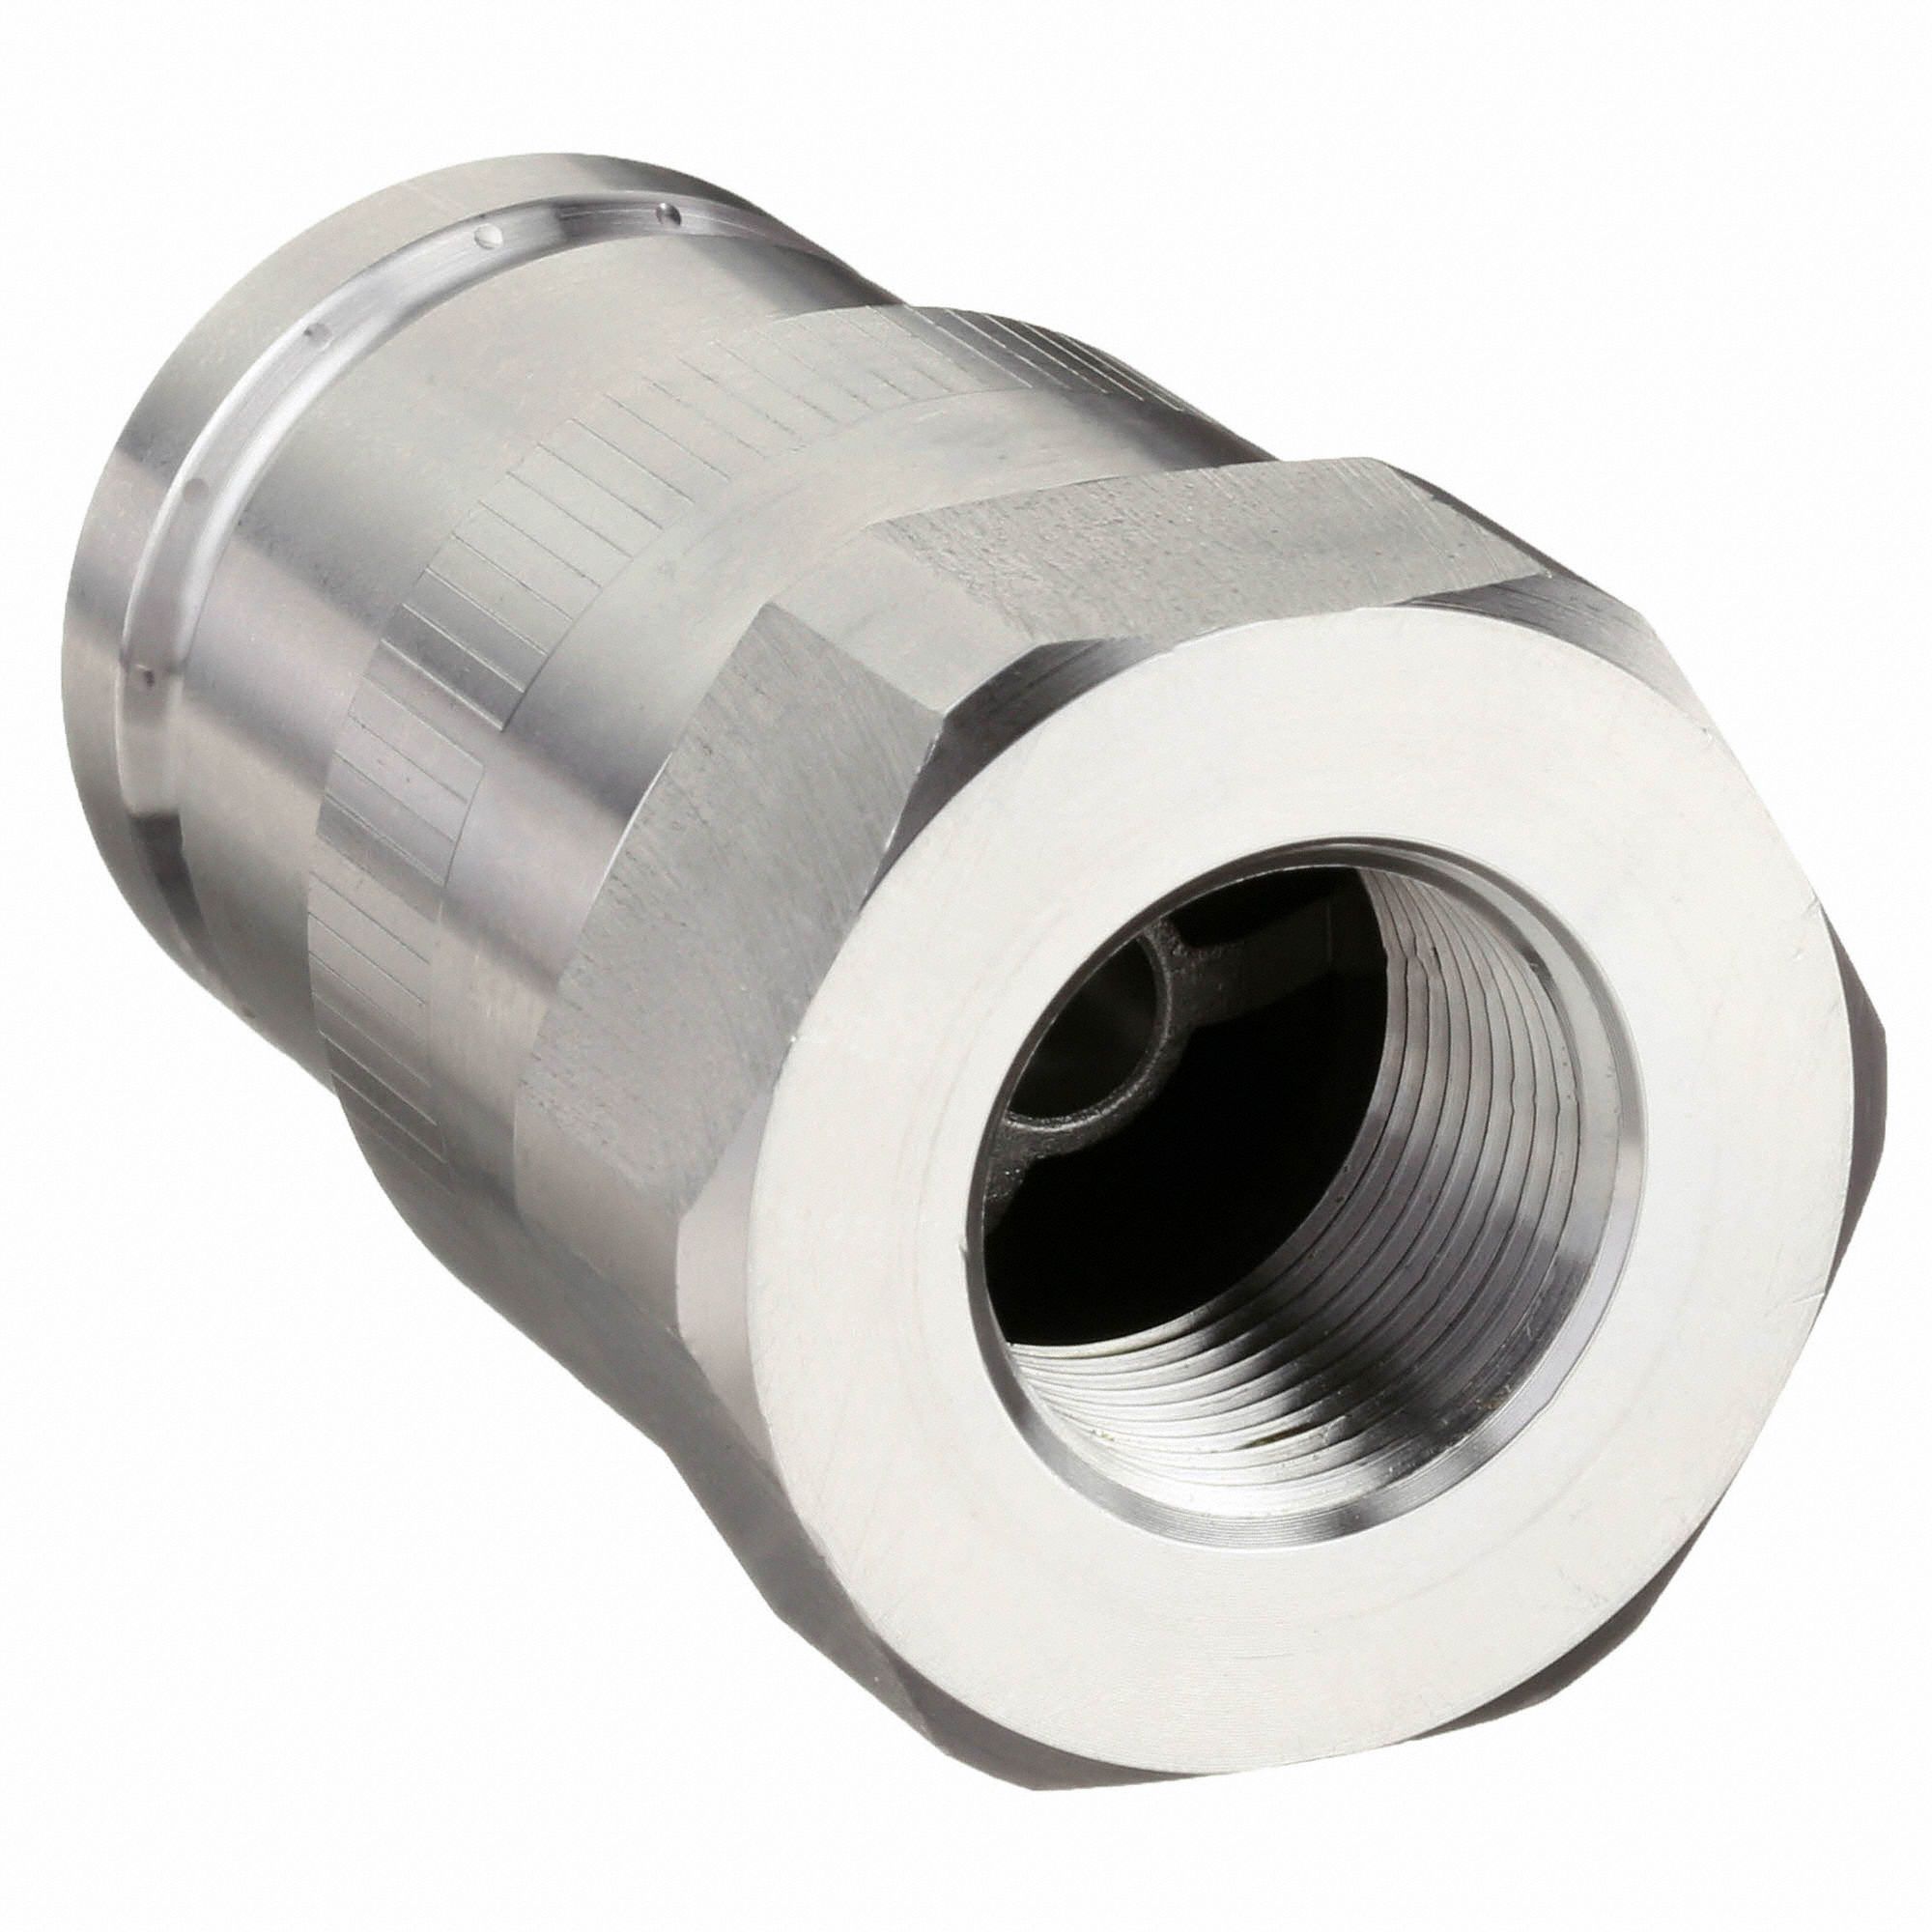 SNAP-TITE Hydraulic Quick Connect Hose Coupling, Plug, 71 Series, 316 ...